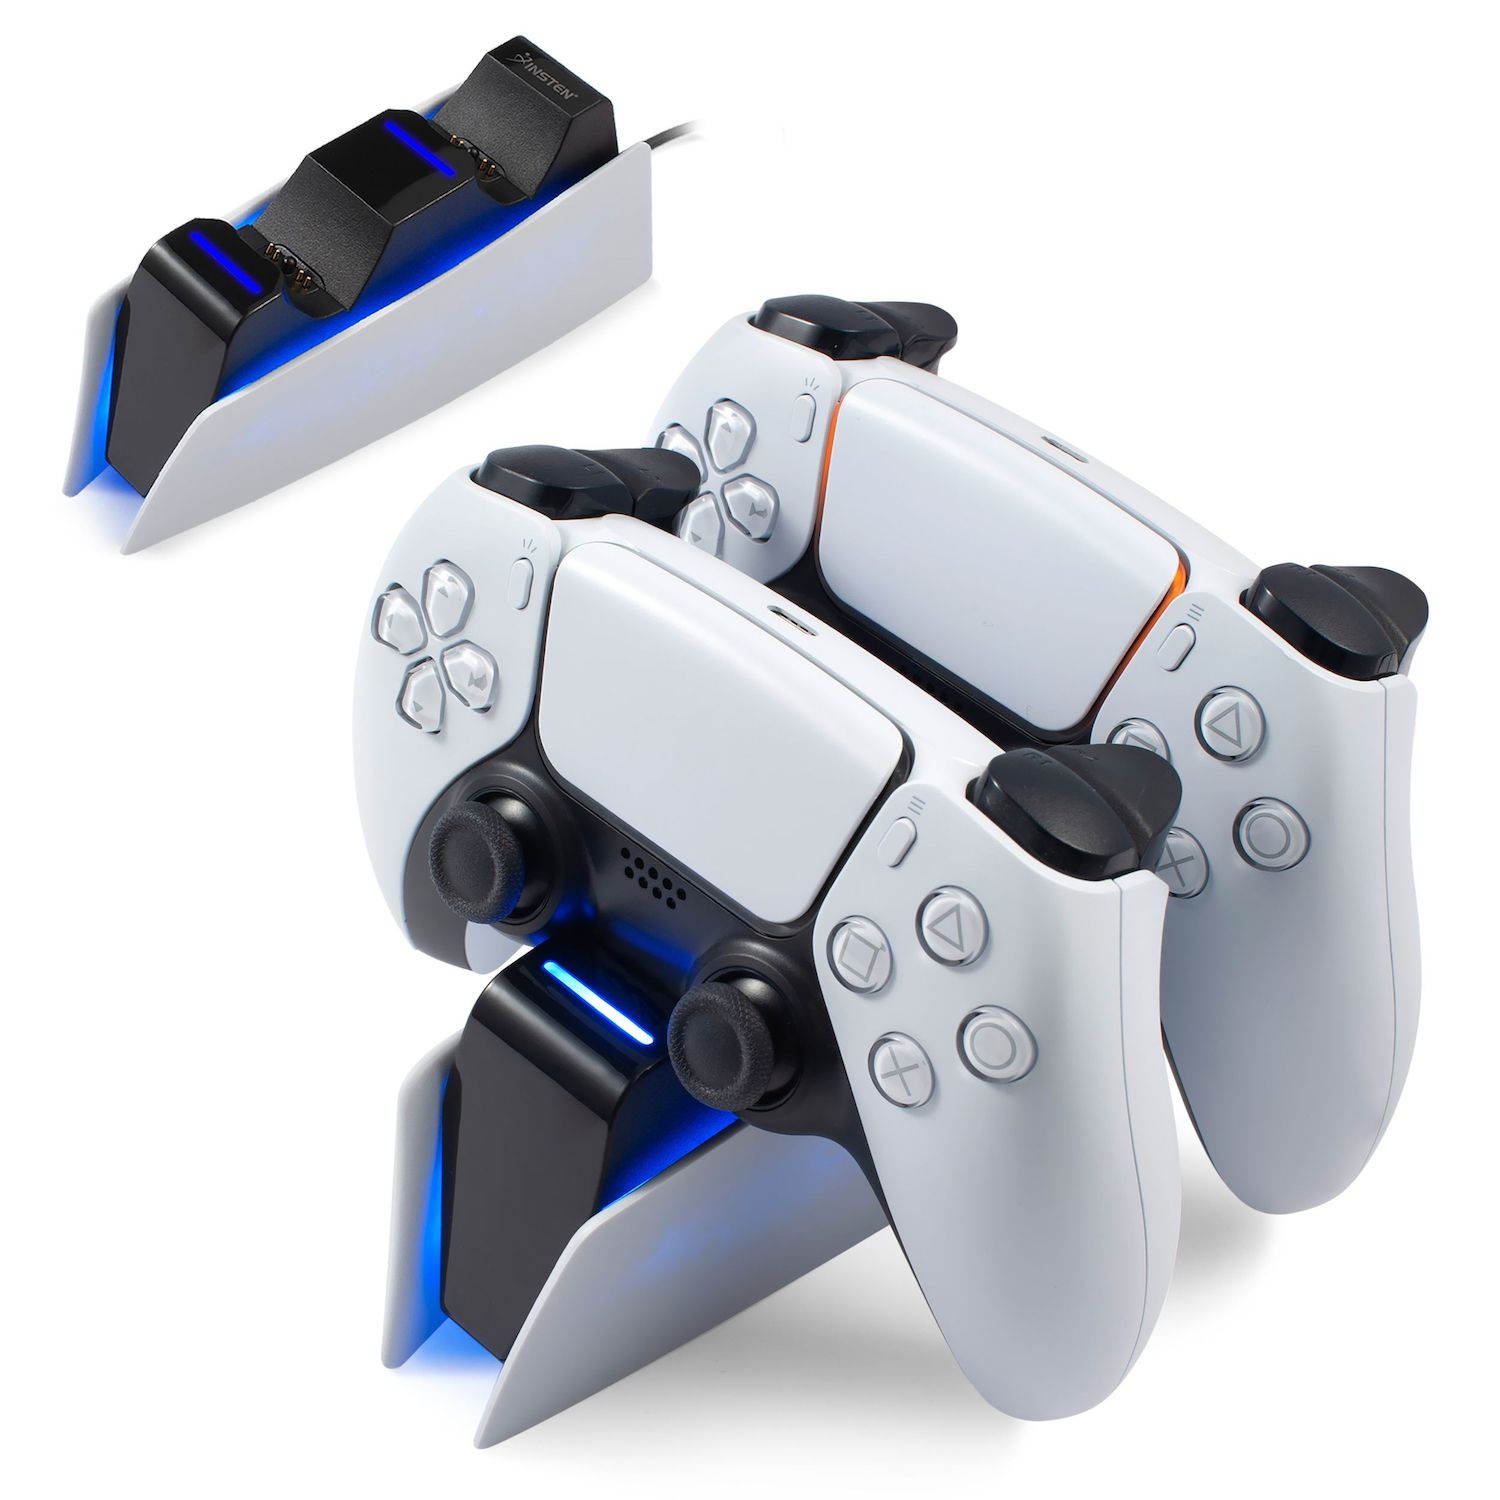 Level Up Your Gaming With Video Game Accessories